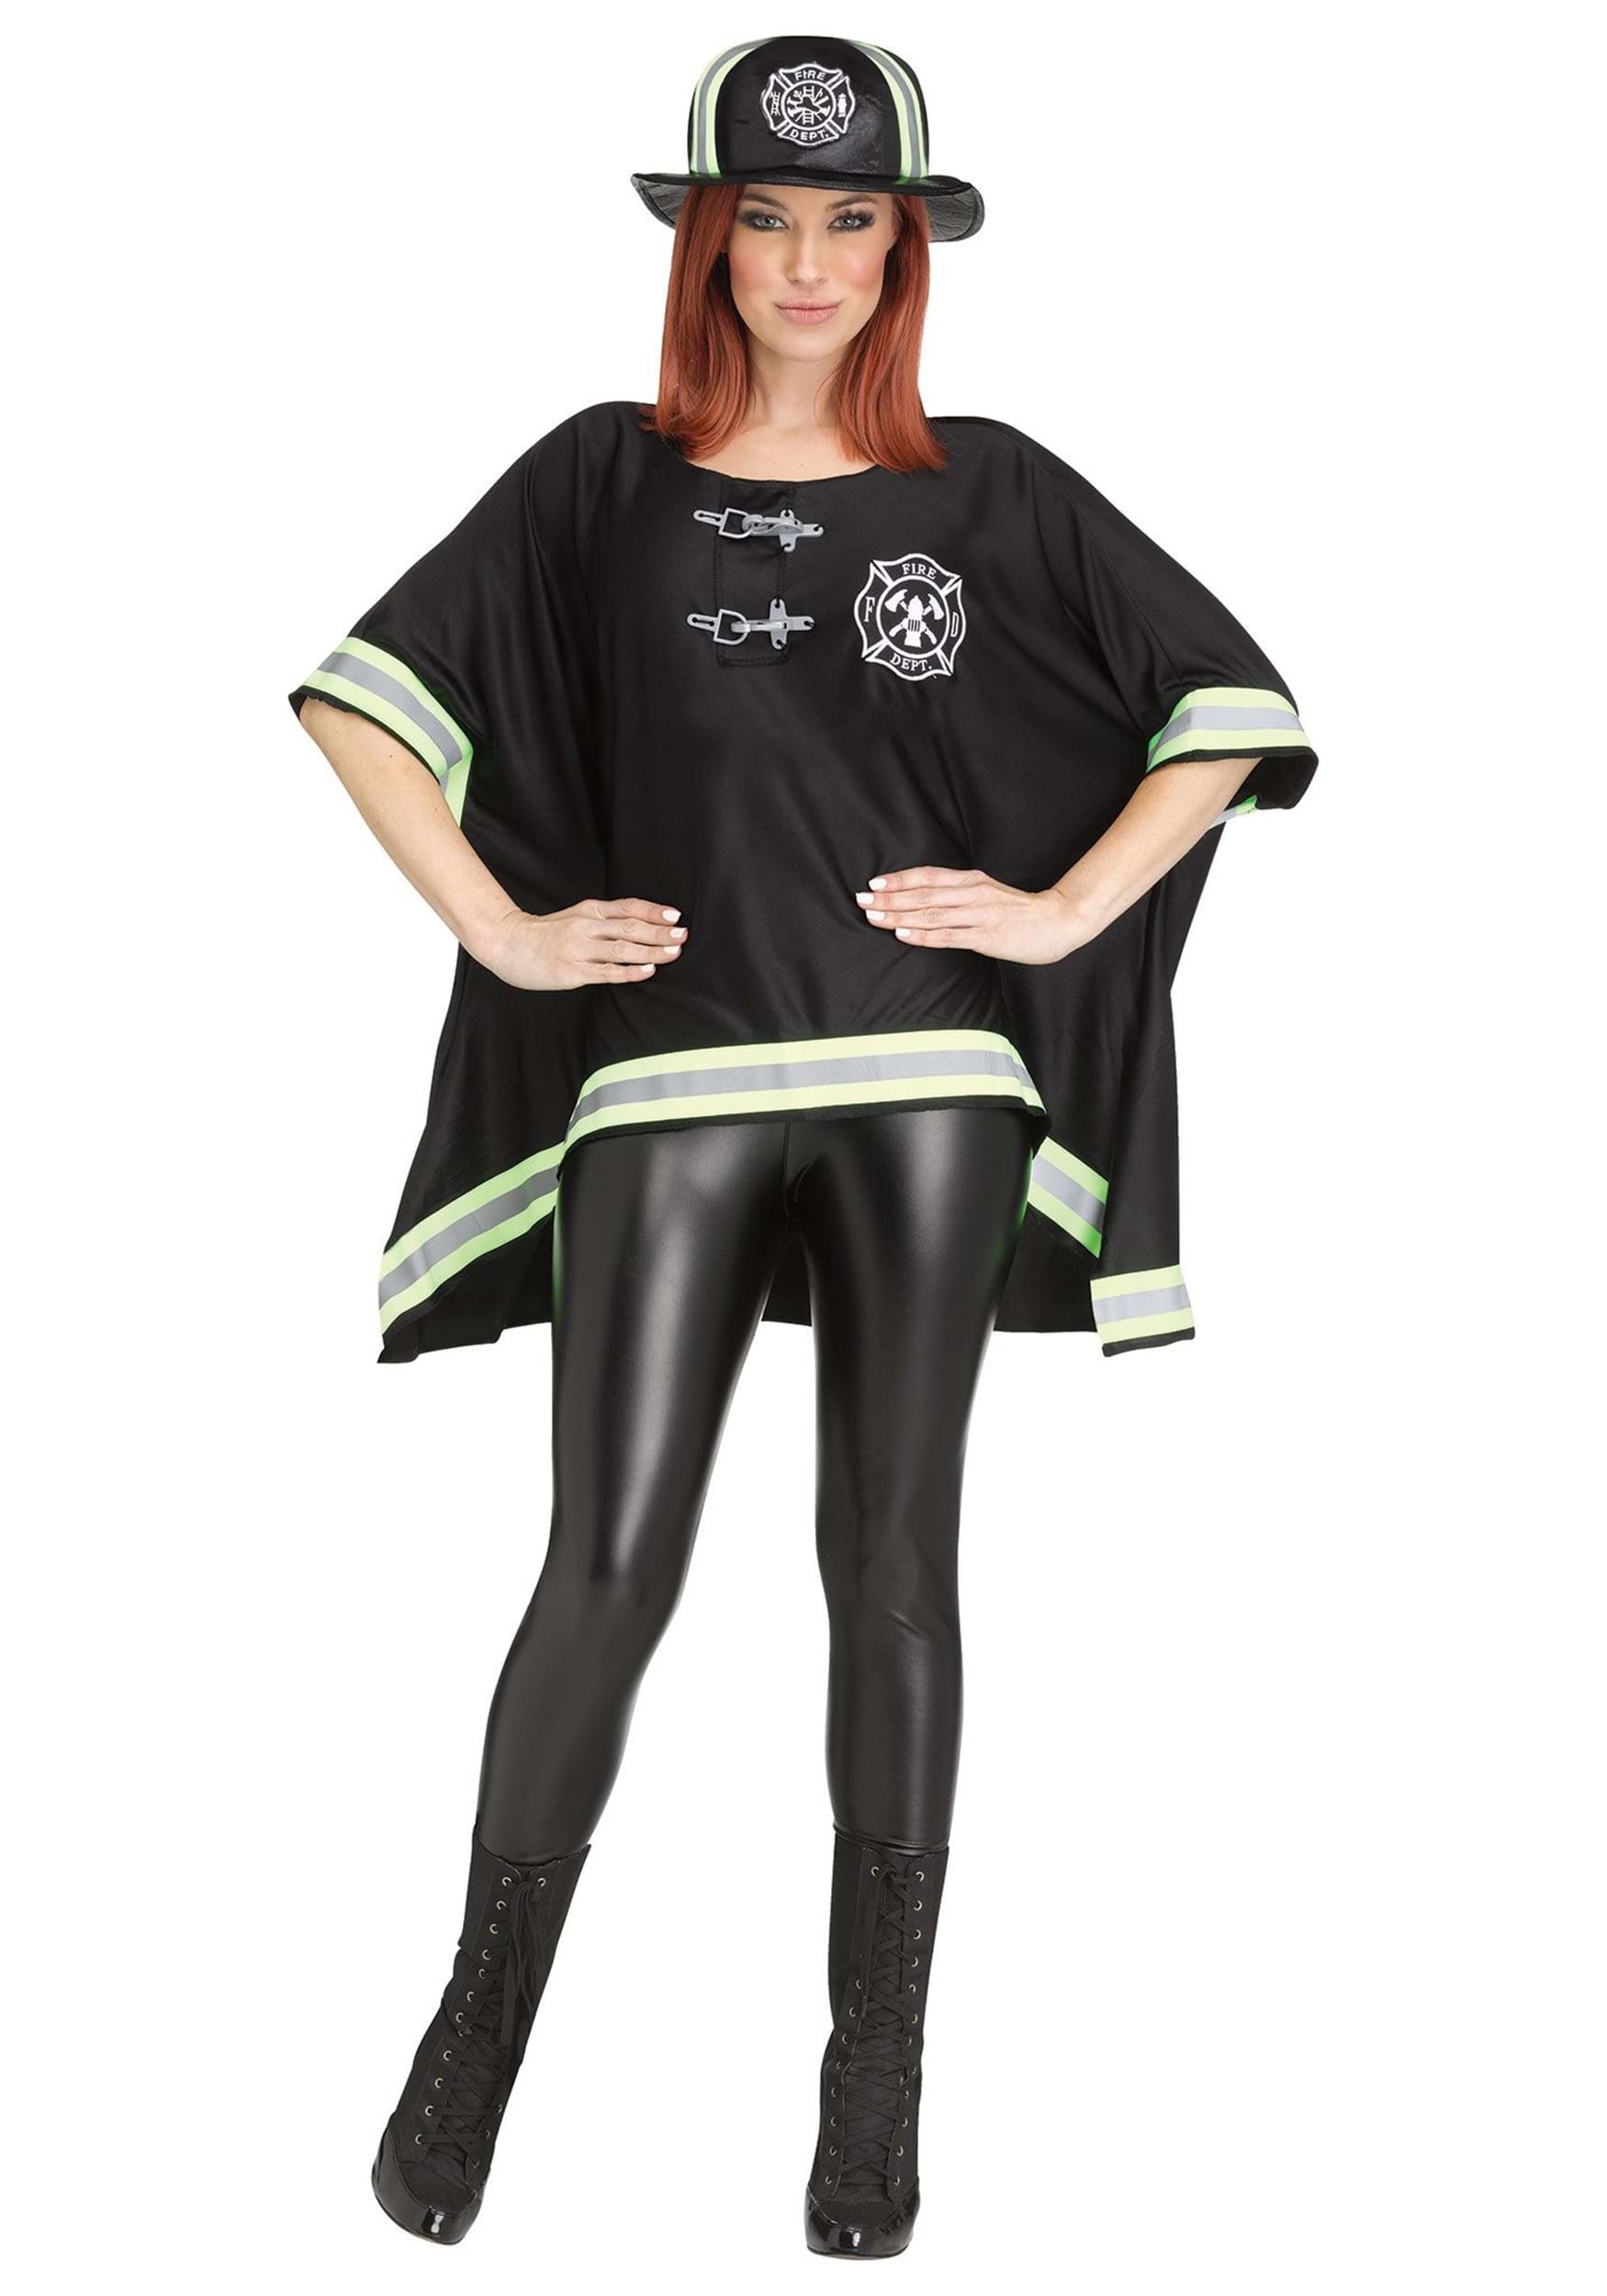 Women's Firefighter Poncho Costume